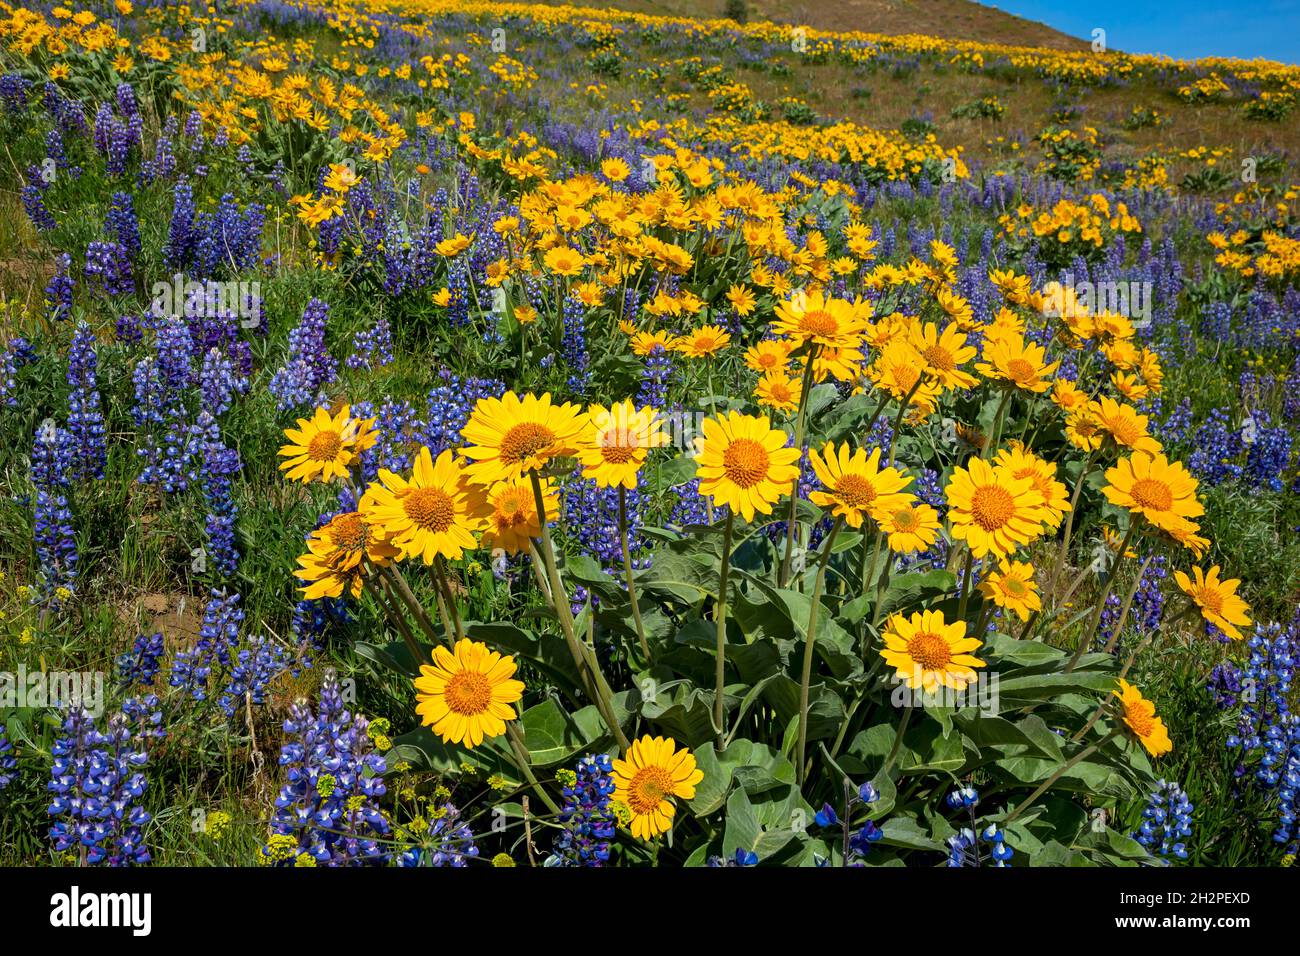 WA19704-00...WASHINGTON - Balsamroot and lupine blooming along the Sage Hills Trail above the town of Wenatchee. Stock Photo